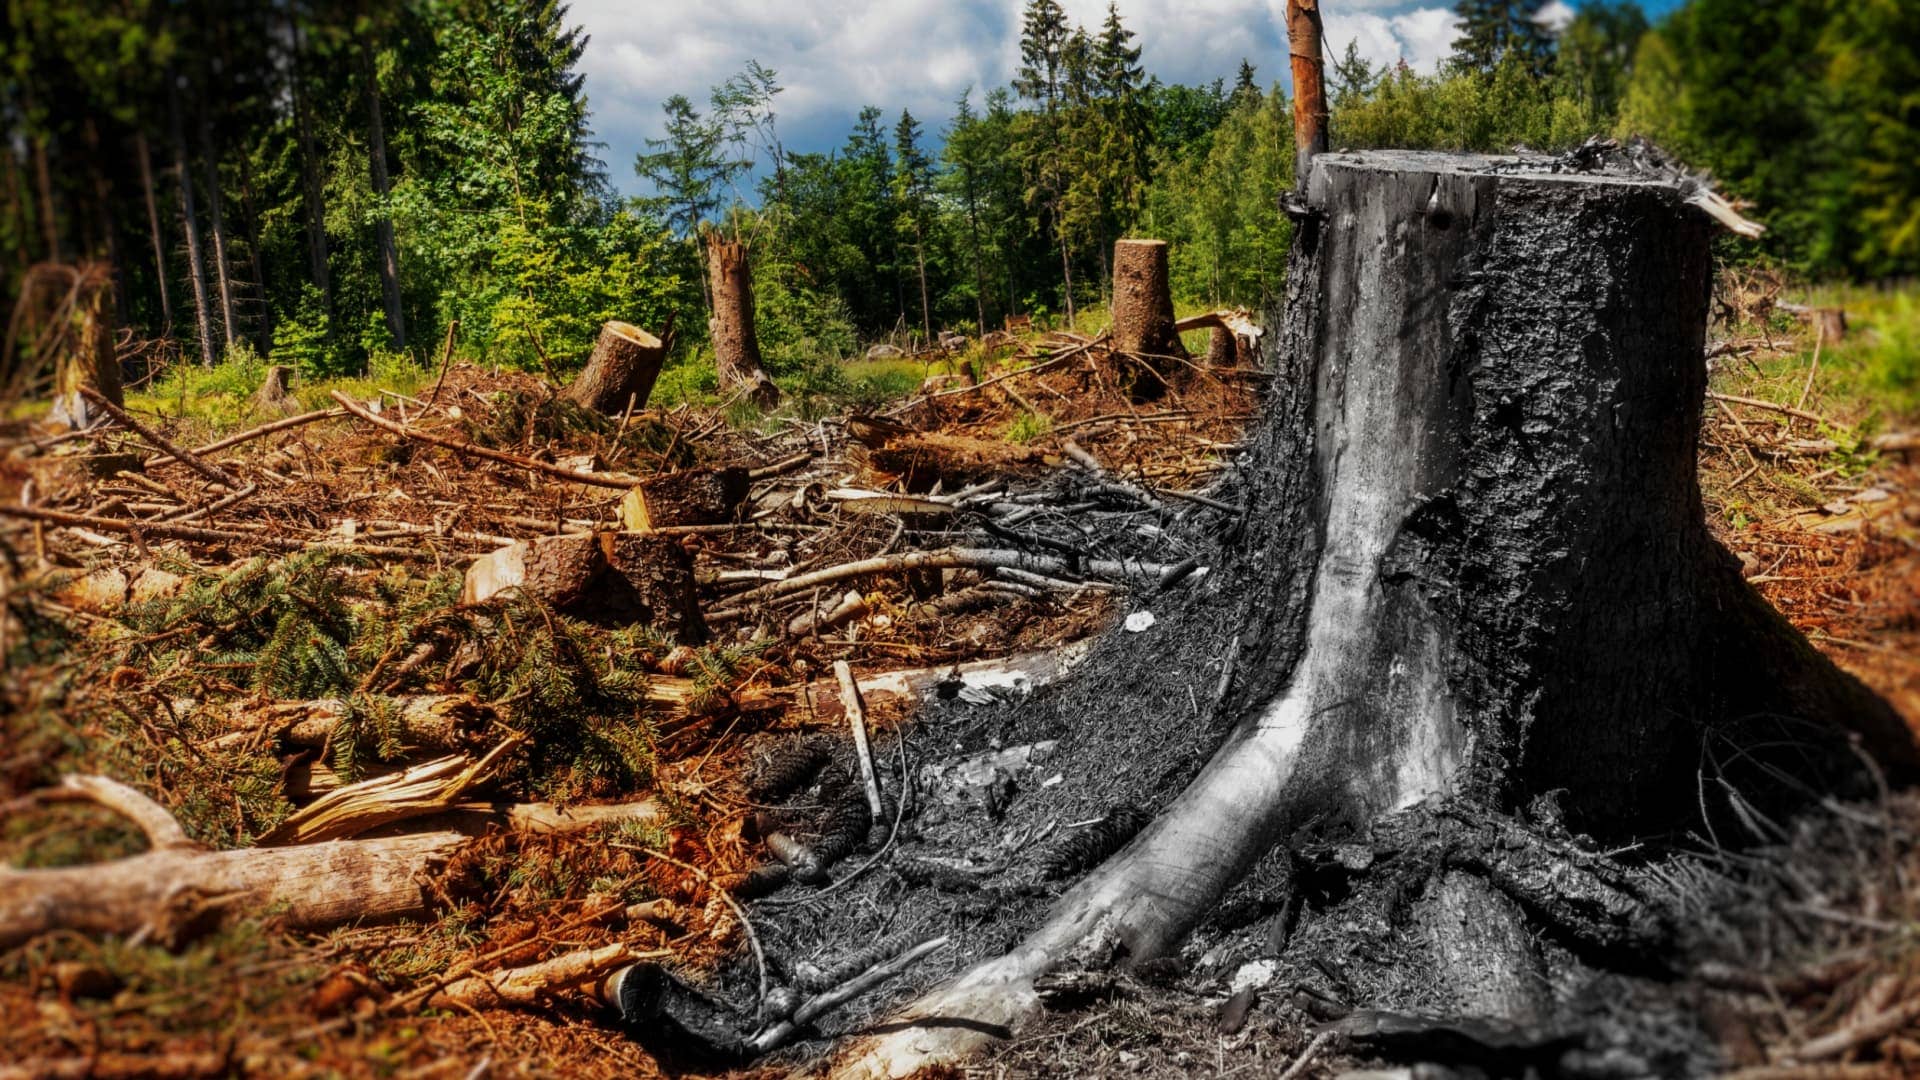 Cut down forest. Forest Cutting. Разрушение лесов. Cut down Forests. Cutting down Forests картинки.